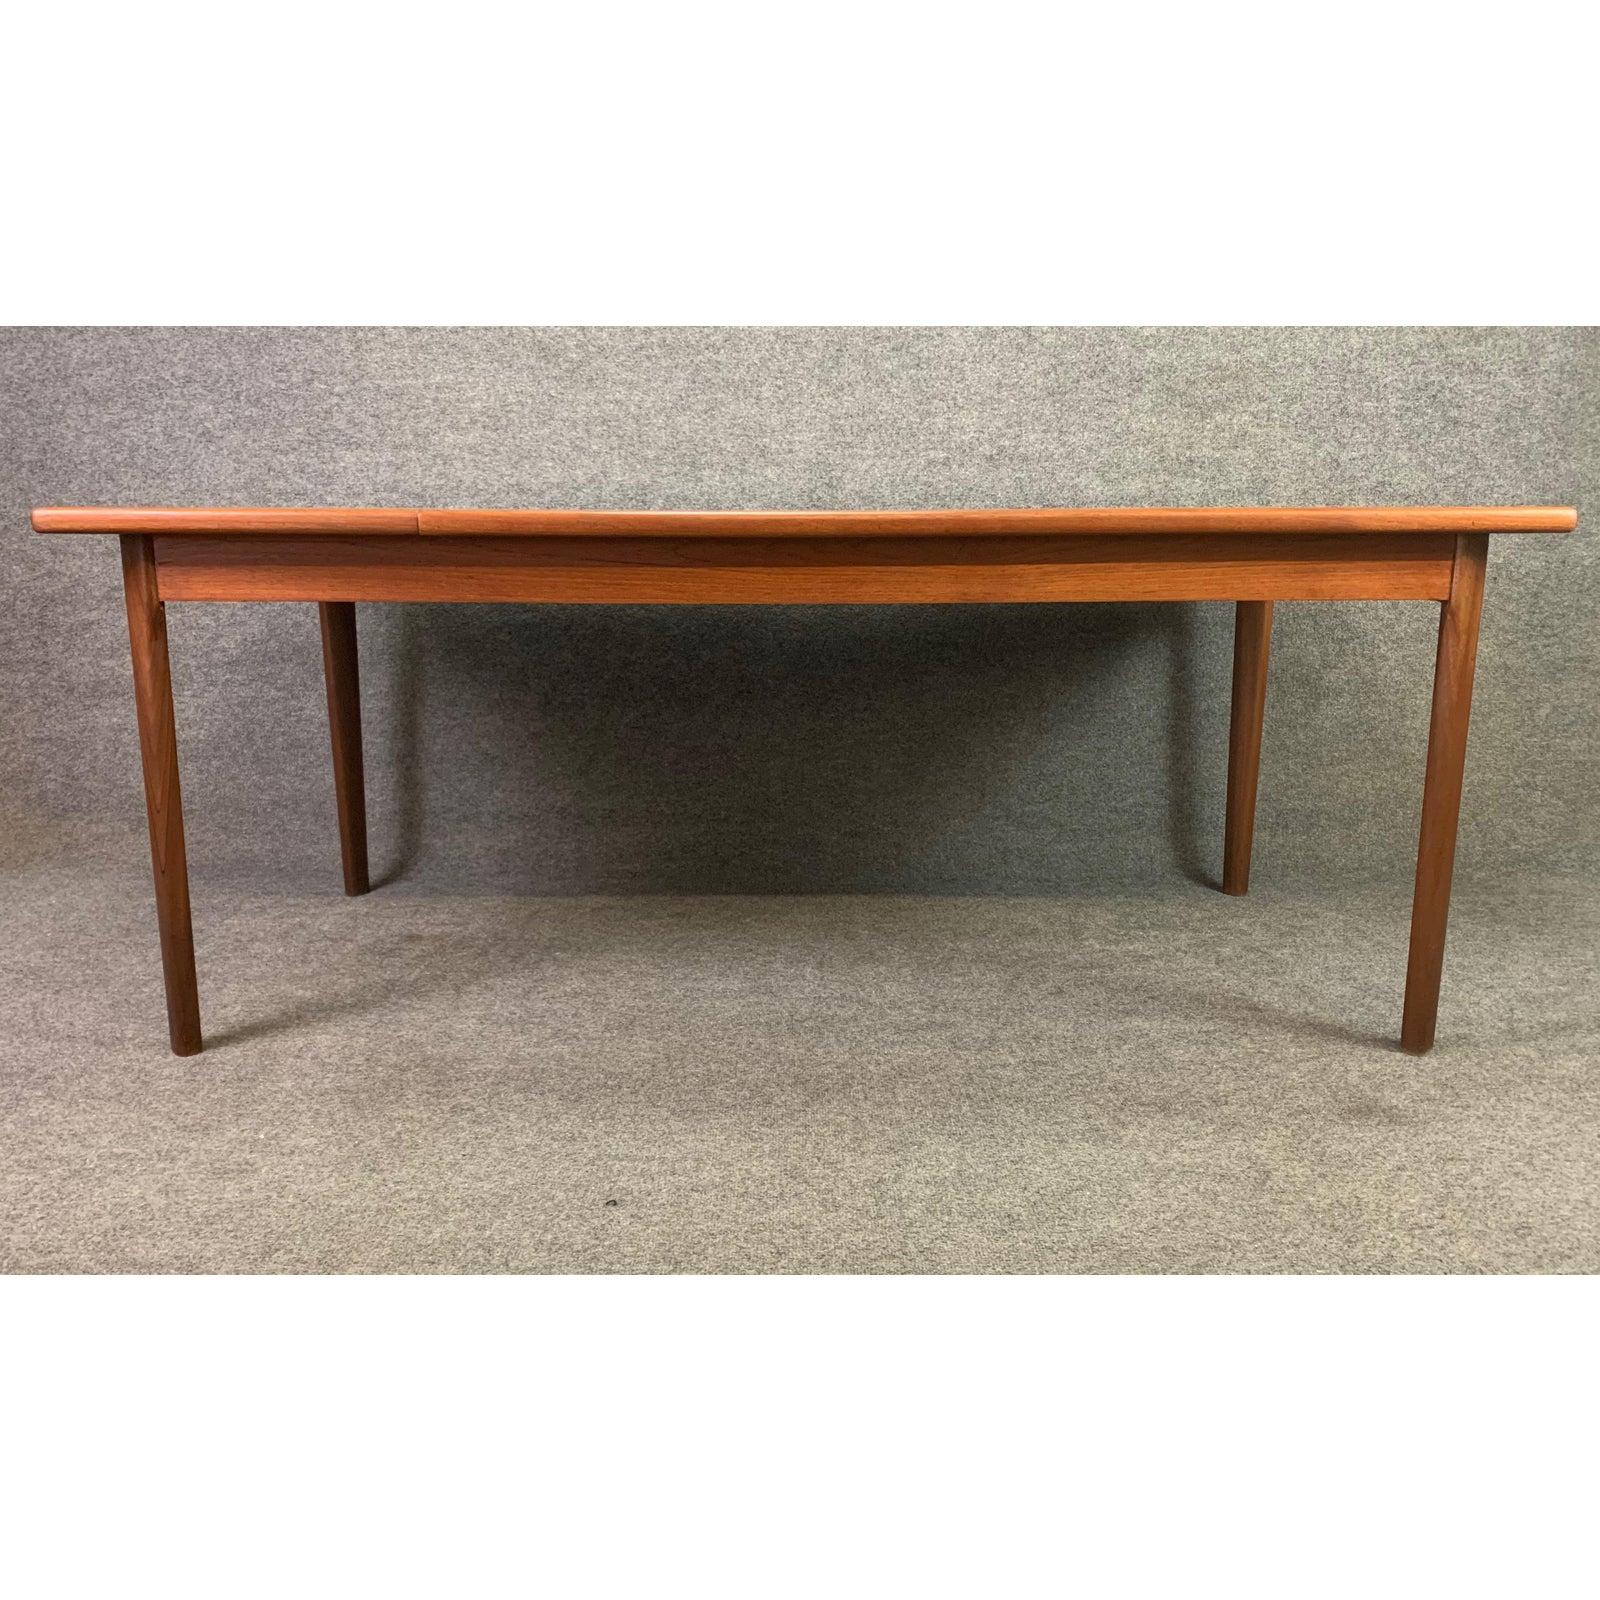 Here is a beautiful and rather large 1960s dining table in teak wood recently imported from Denmark to California before its restoration.
This table features a large top showing vibrant wood grain details supported by a frame mounted on four solid